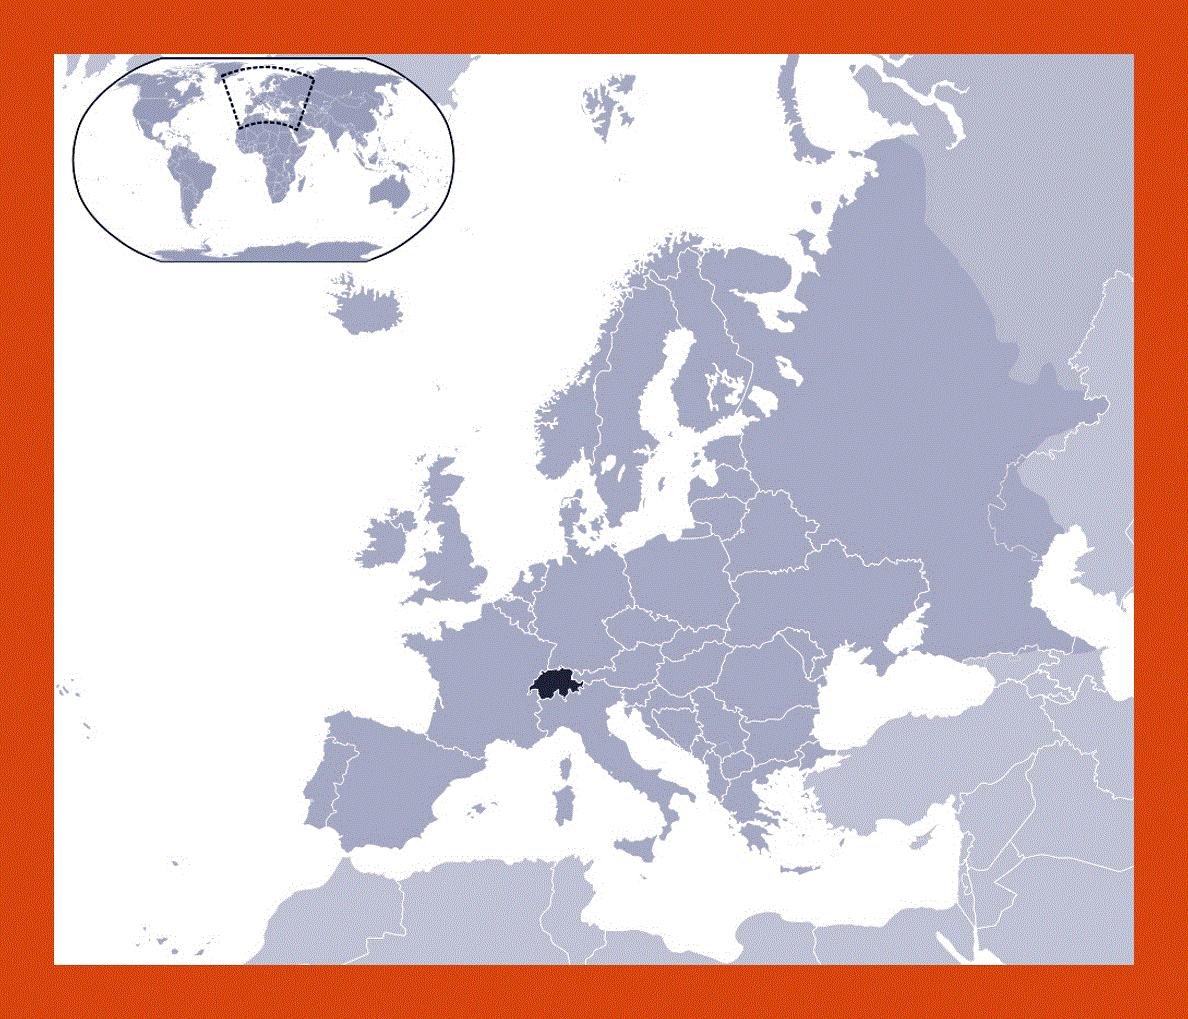 Location map of Switzerland on map of Europe